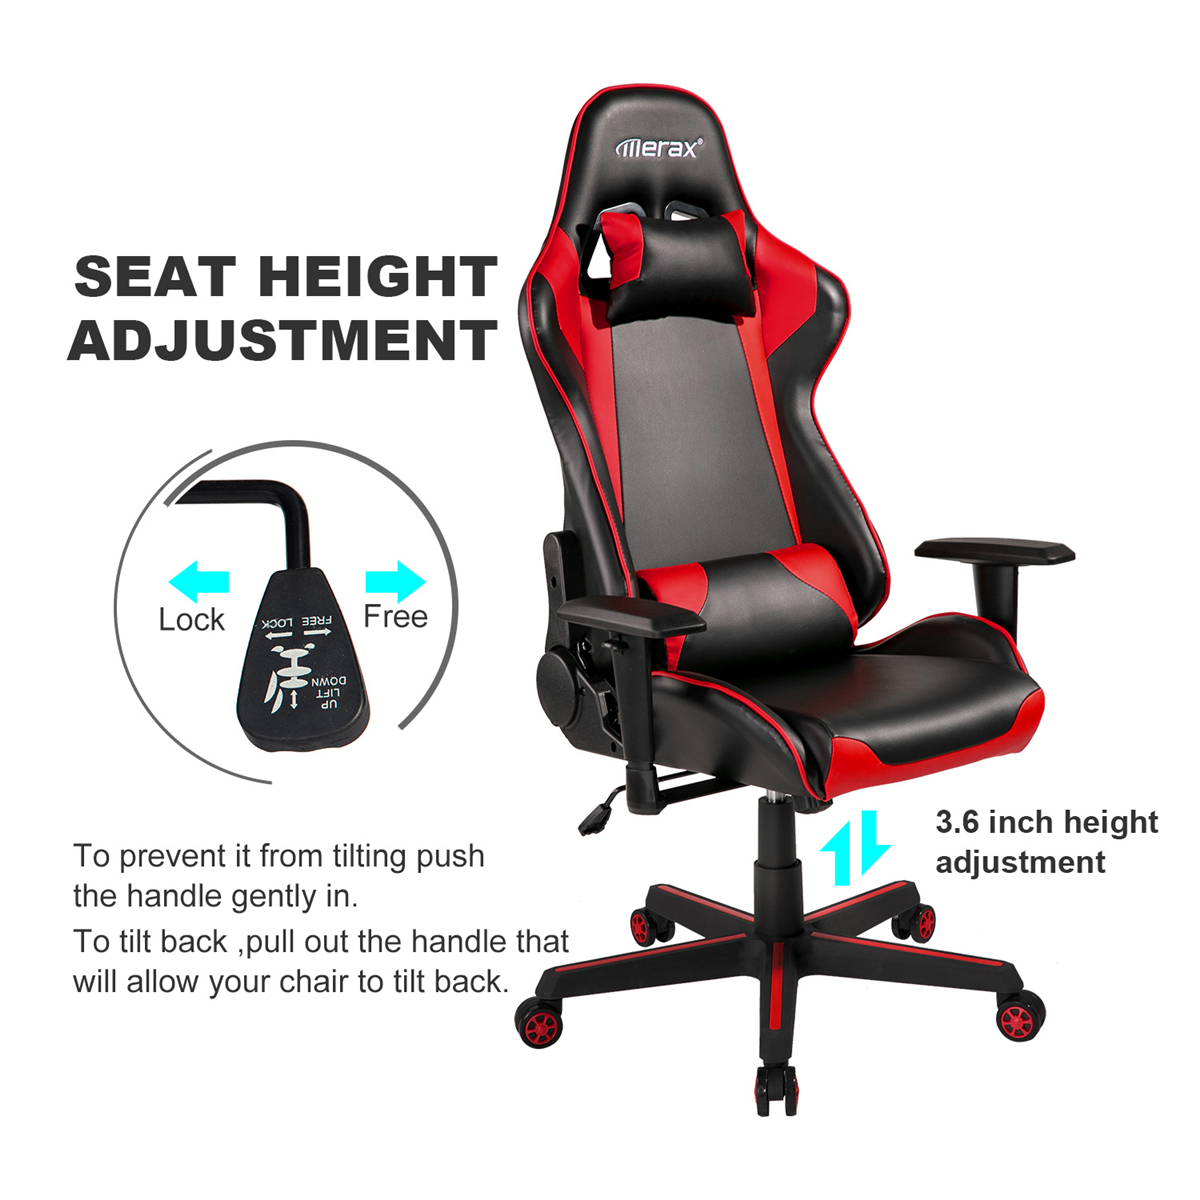 Aminiture High Curved Back PU Leather White Home Office Chair Executive Computer Height Adjustable Swivel Desk Chair Gaming Chair-Black